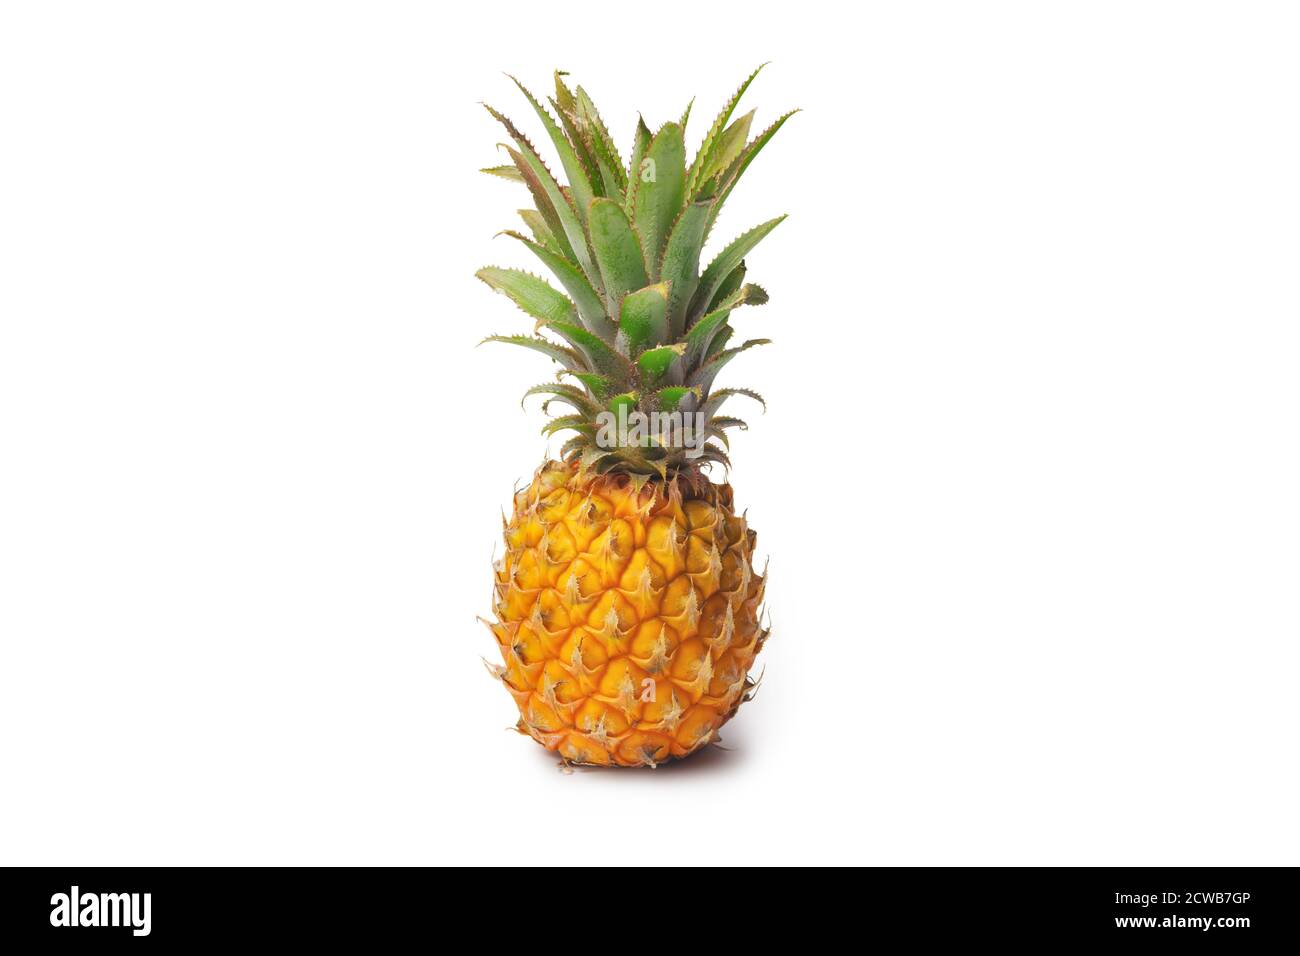 Isolated pineapple on a white background. Exotic fruits. Stock Photo